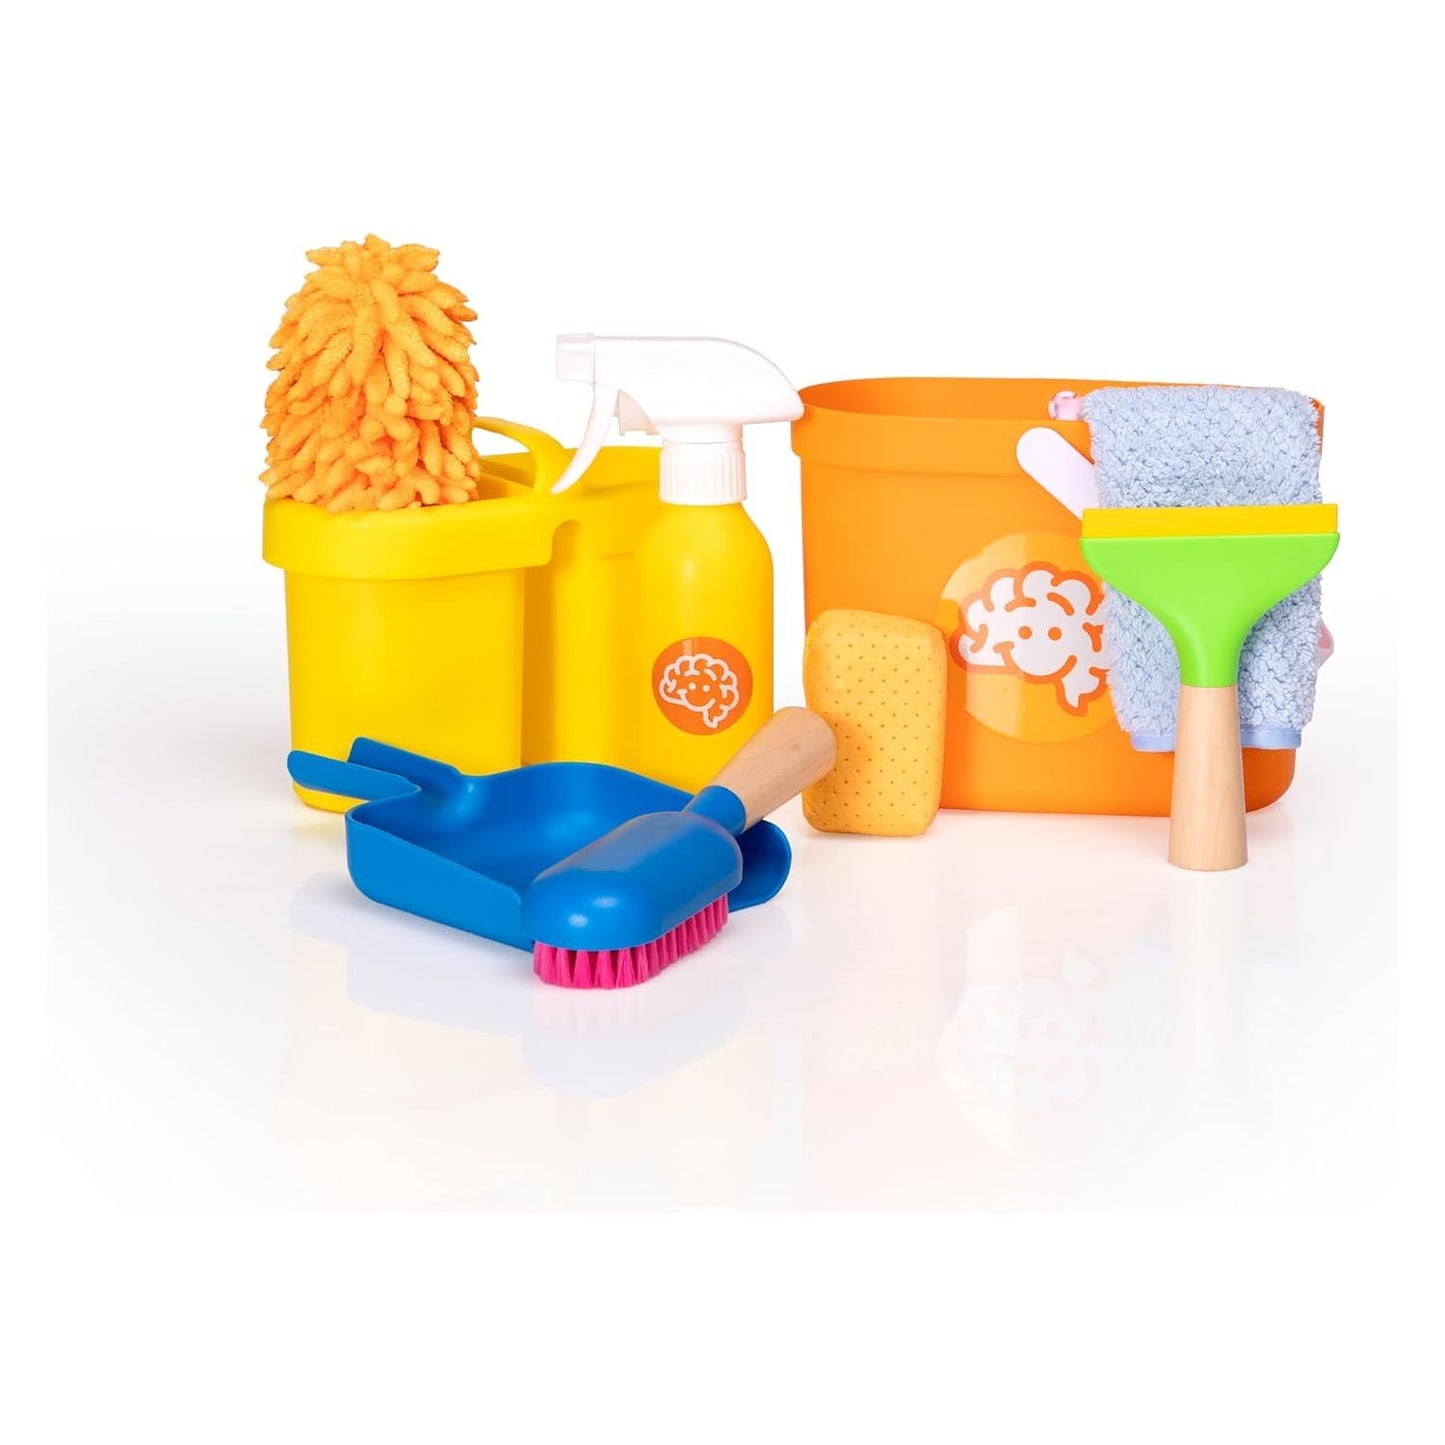 Pretendables Cleaning Set